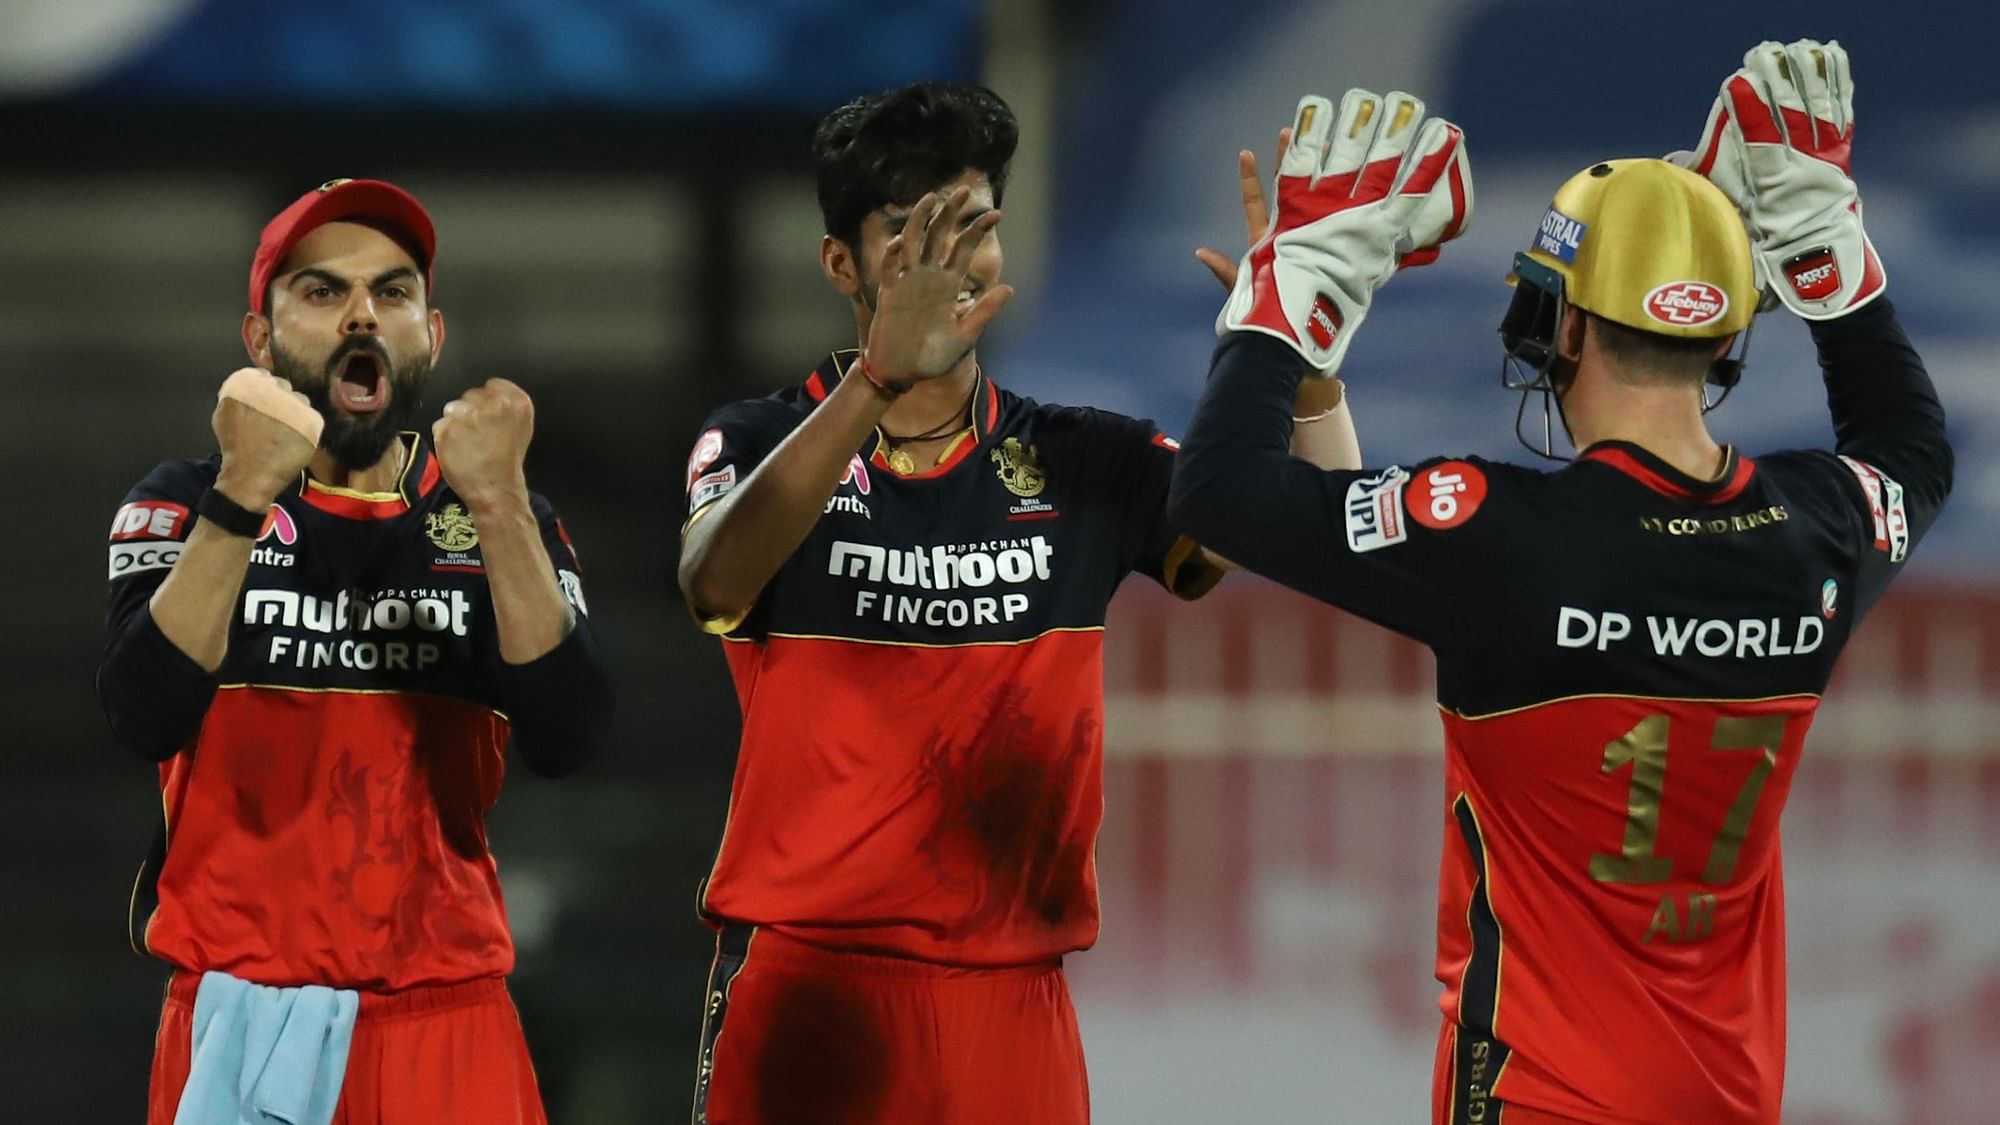 Royal Challengers Bangalore (RCB) completed their fifth win in seven games, defeating Kolkata Knight Riders (KKR) on Monday.